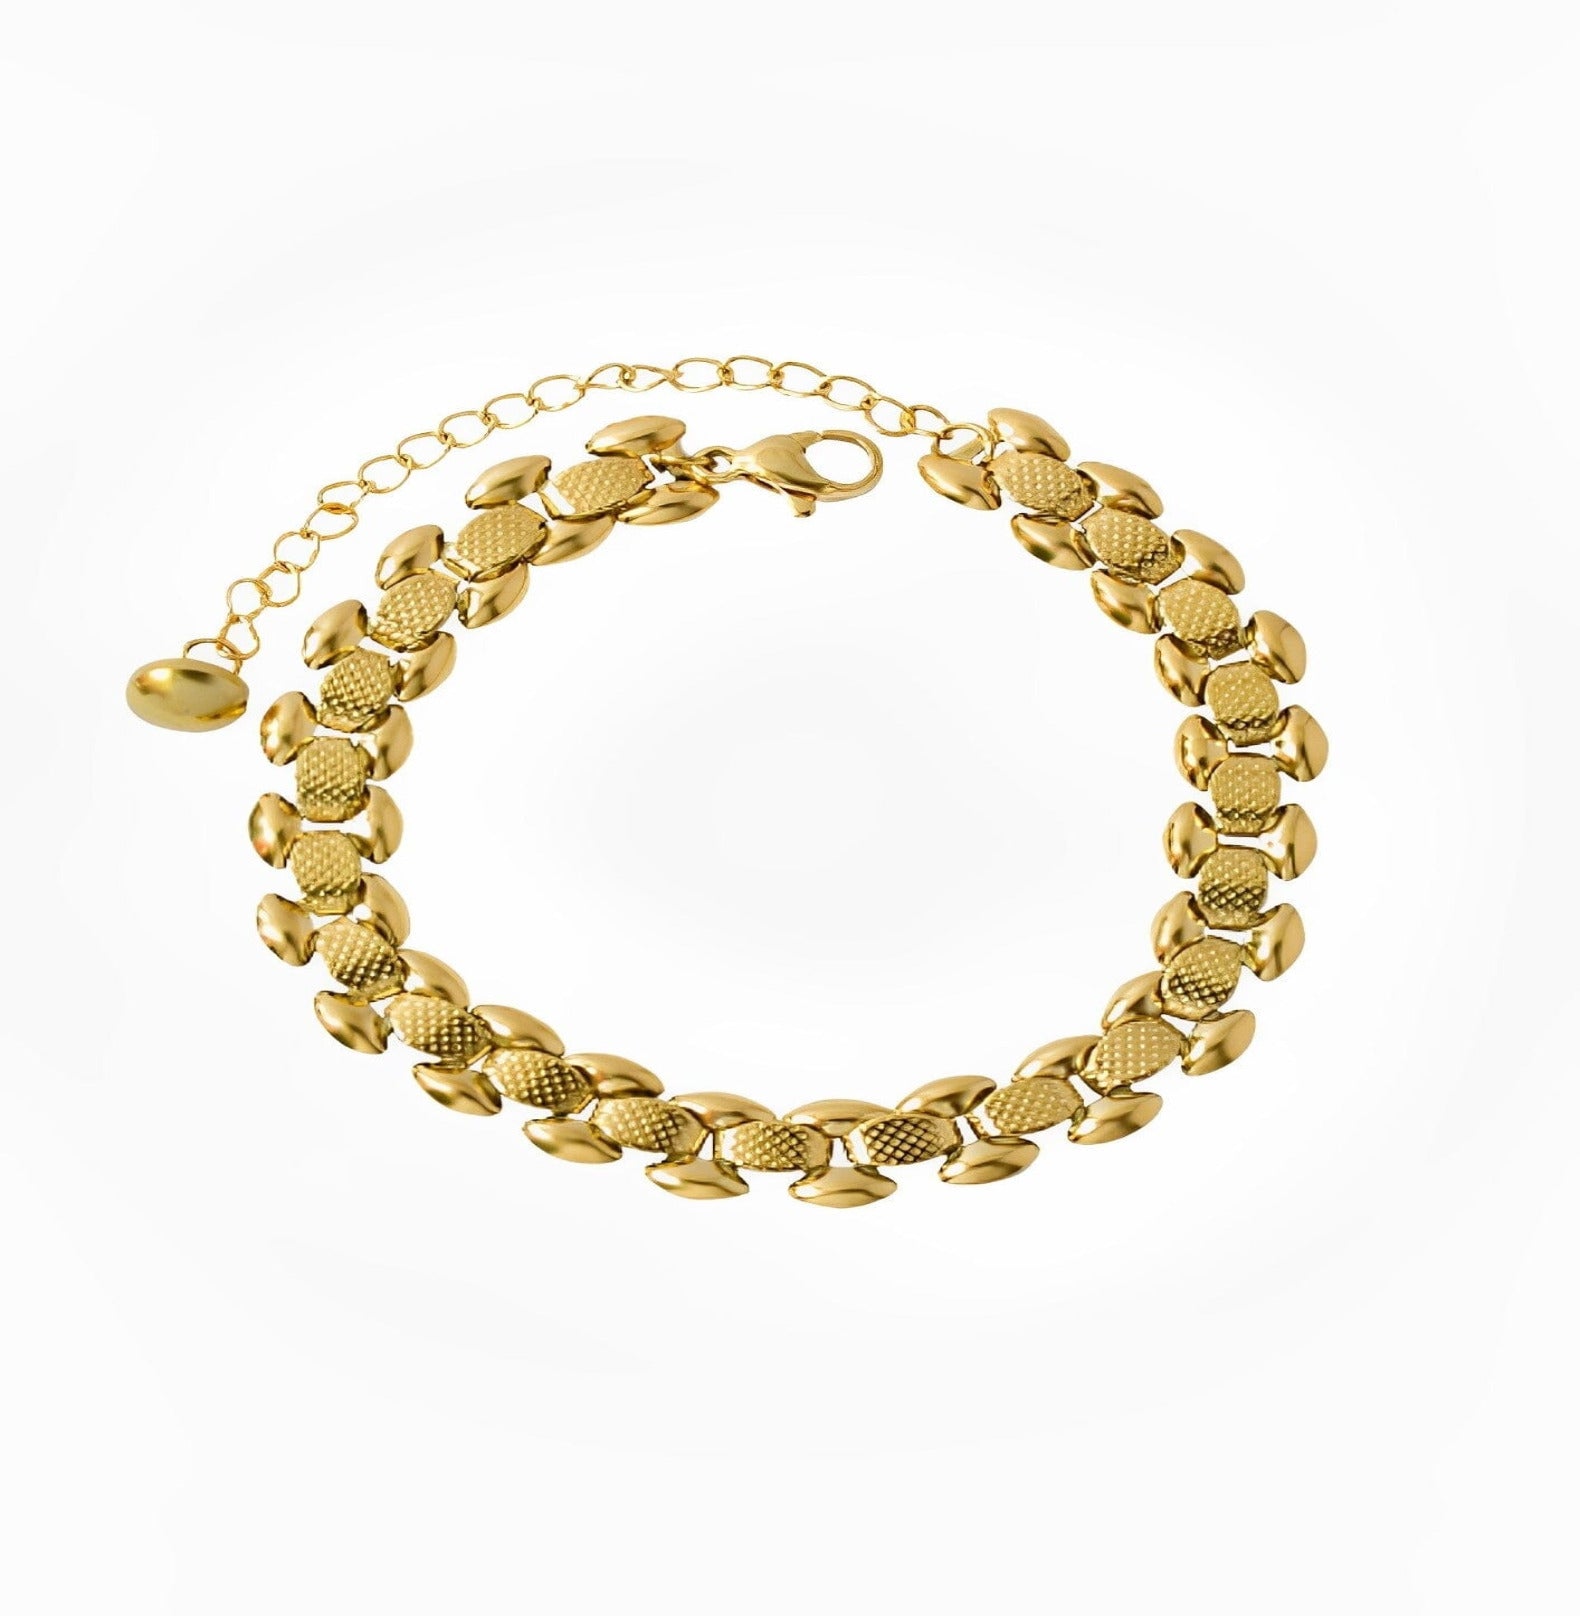 COLE BRACELET braclet Yubama Jewelry Online Store - The Elegant Designs of Gold and Silver ! 